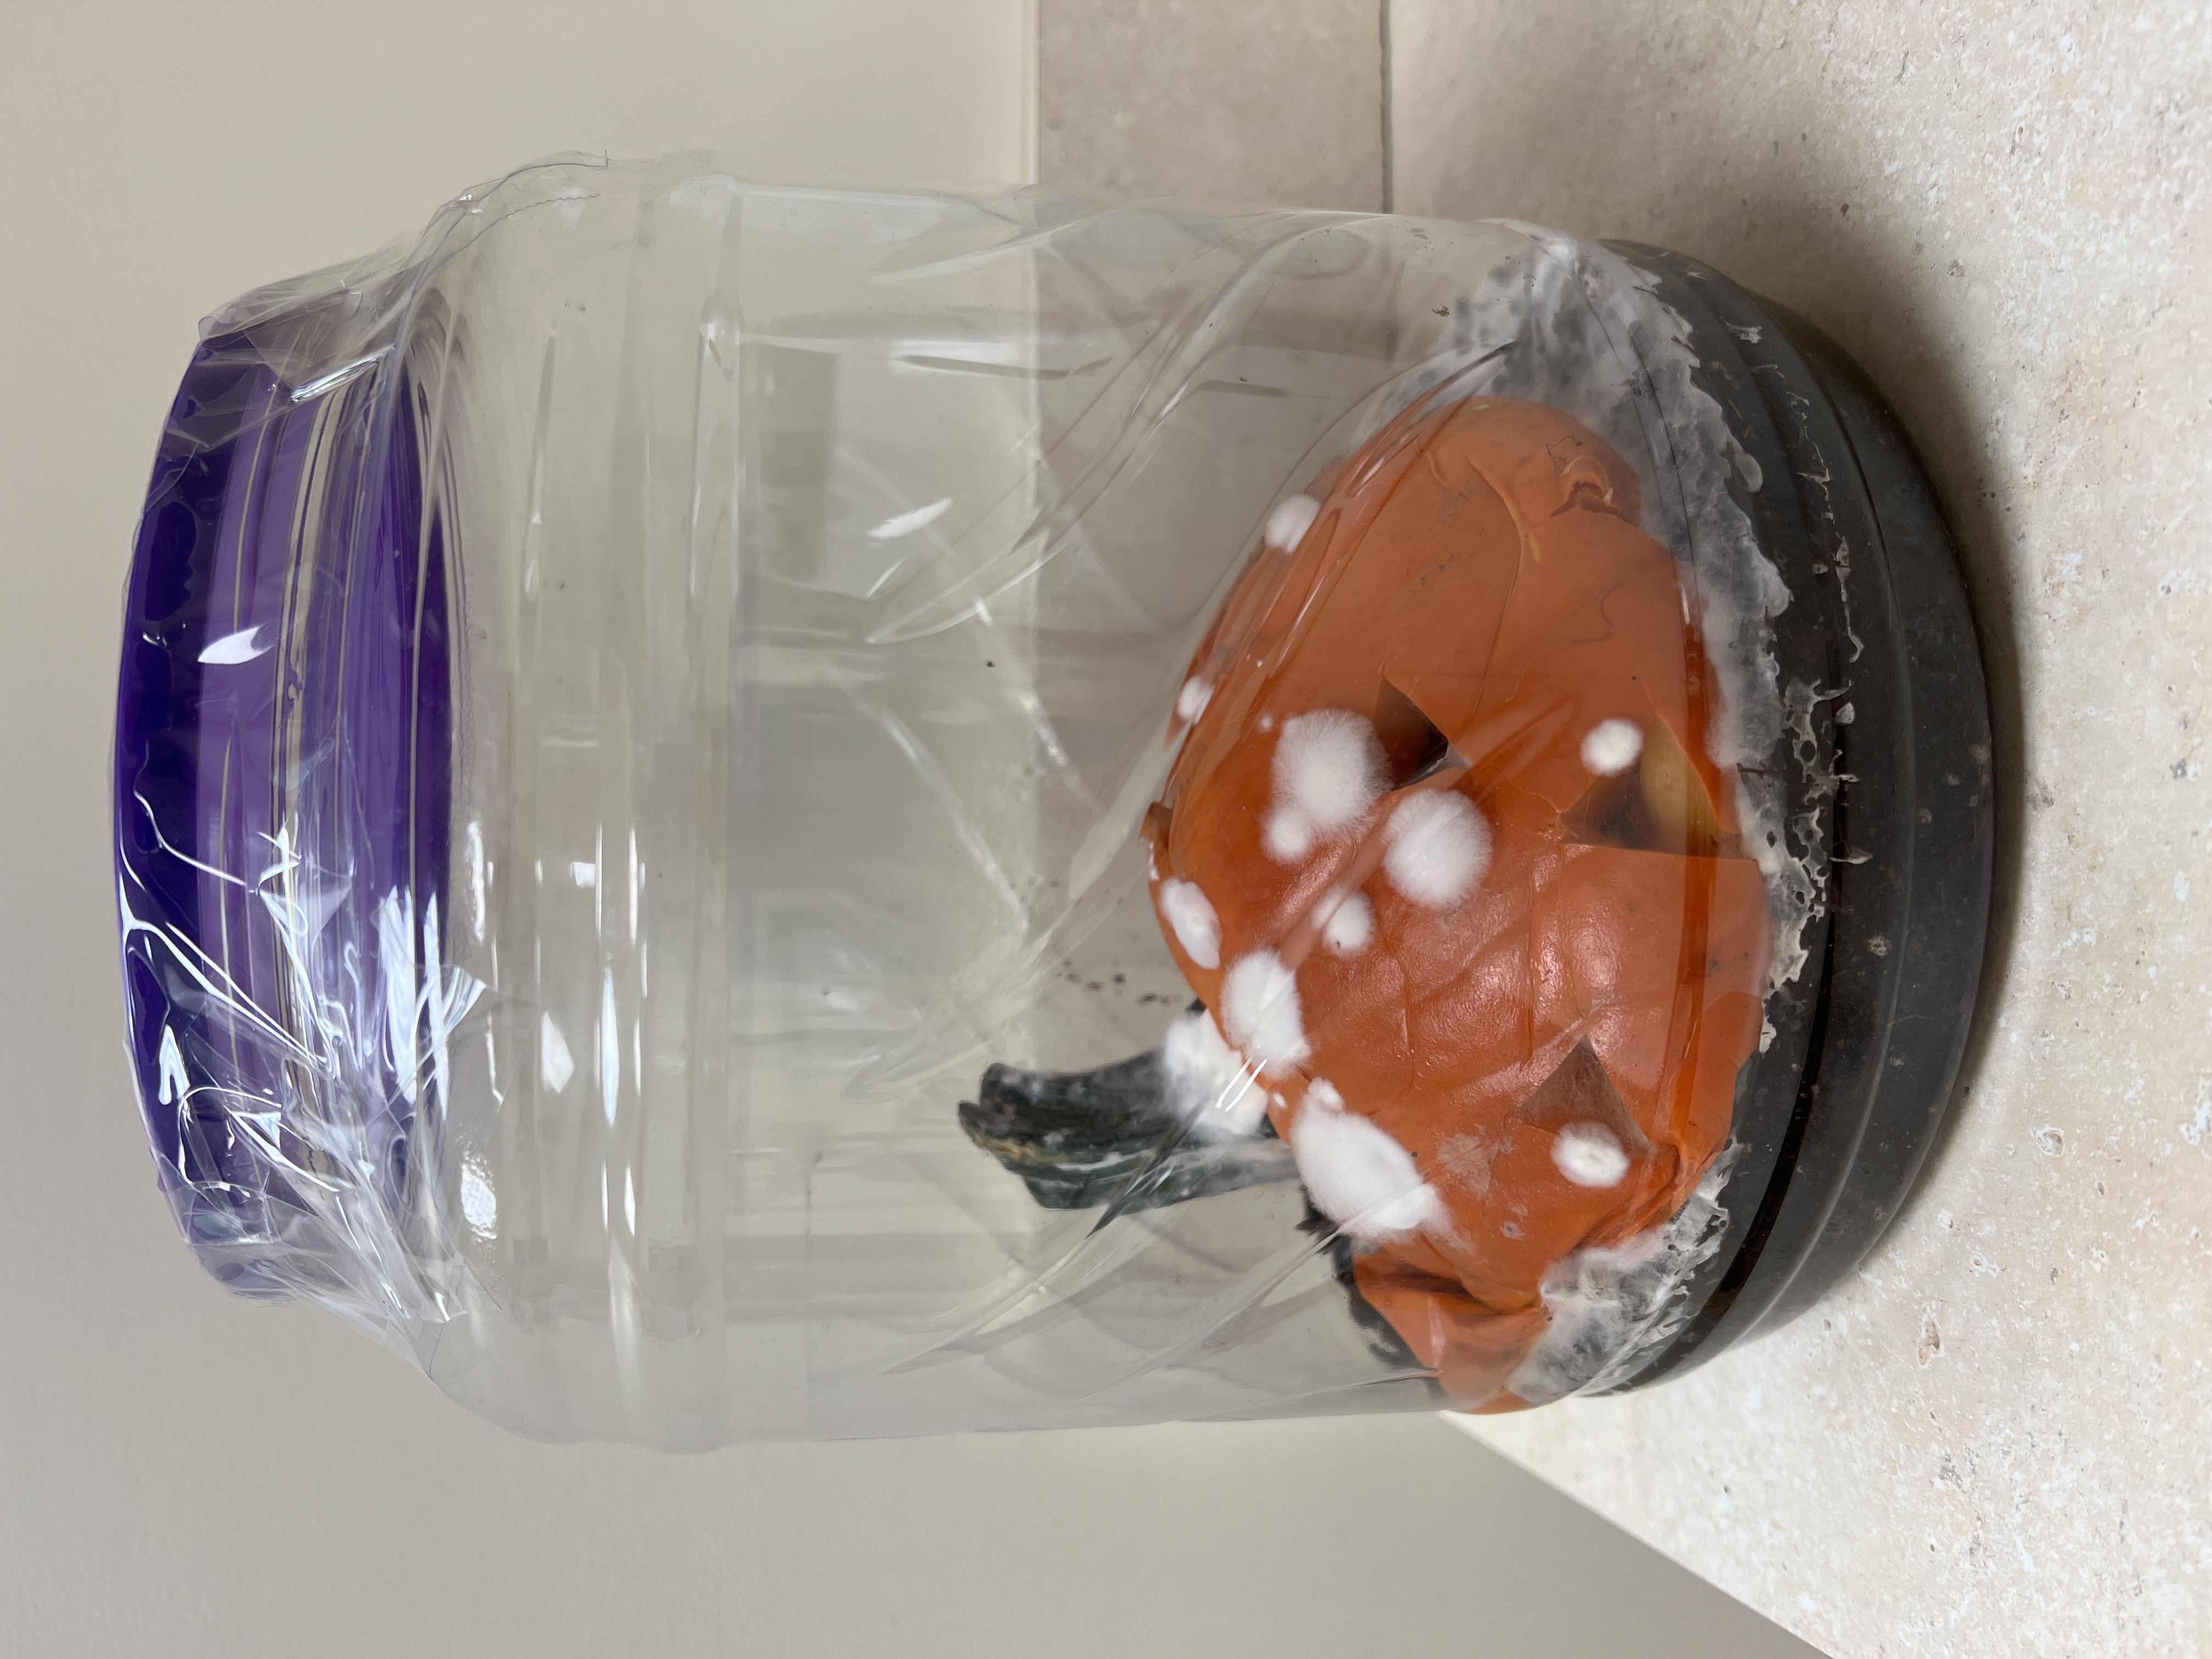 A pumpkin in a jar decomposing. It has white mold growing along its surface.